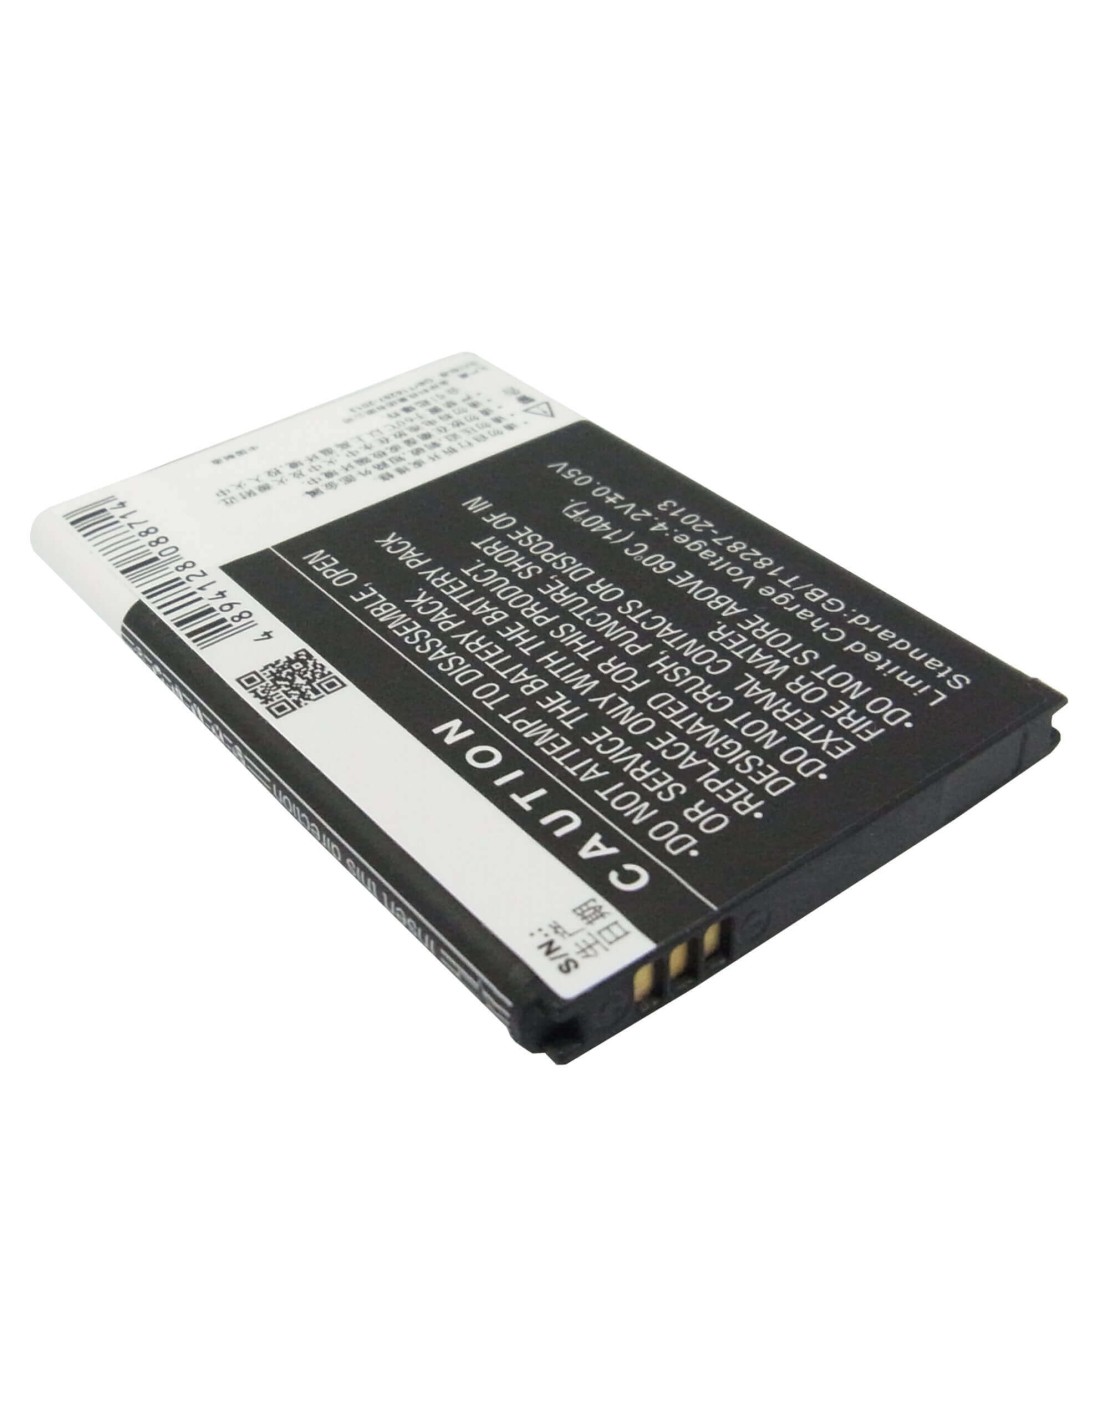 Battery for Coolpad 8809 3.7V, 1500mAh - 5.55Wh